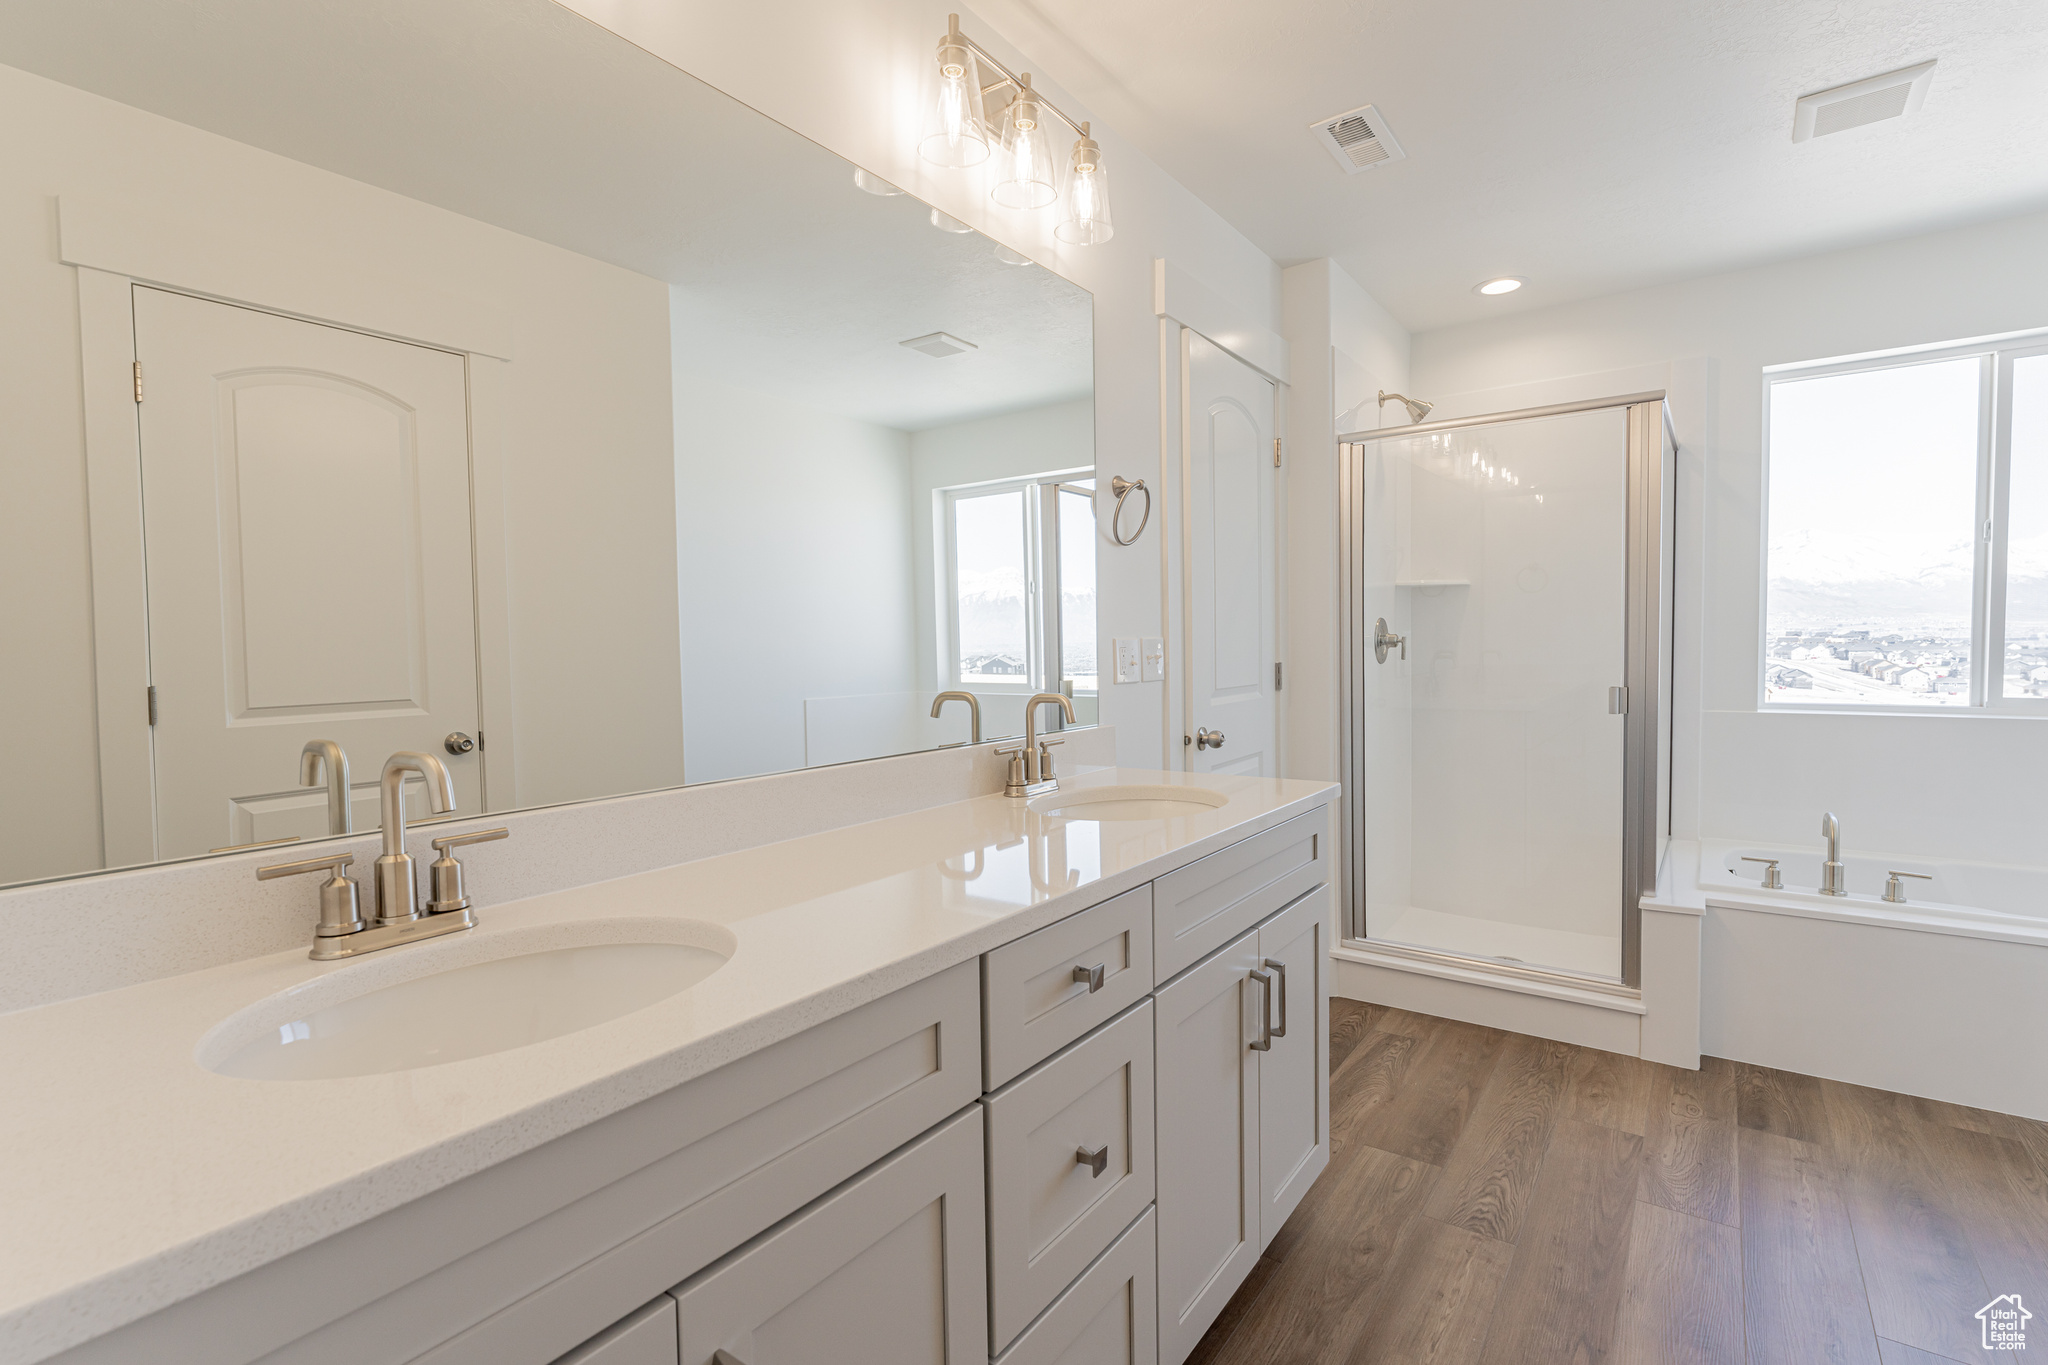 Bathroom with hardwood / wood-style flooring, separate shower and tub, double sink, and large vanity